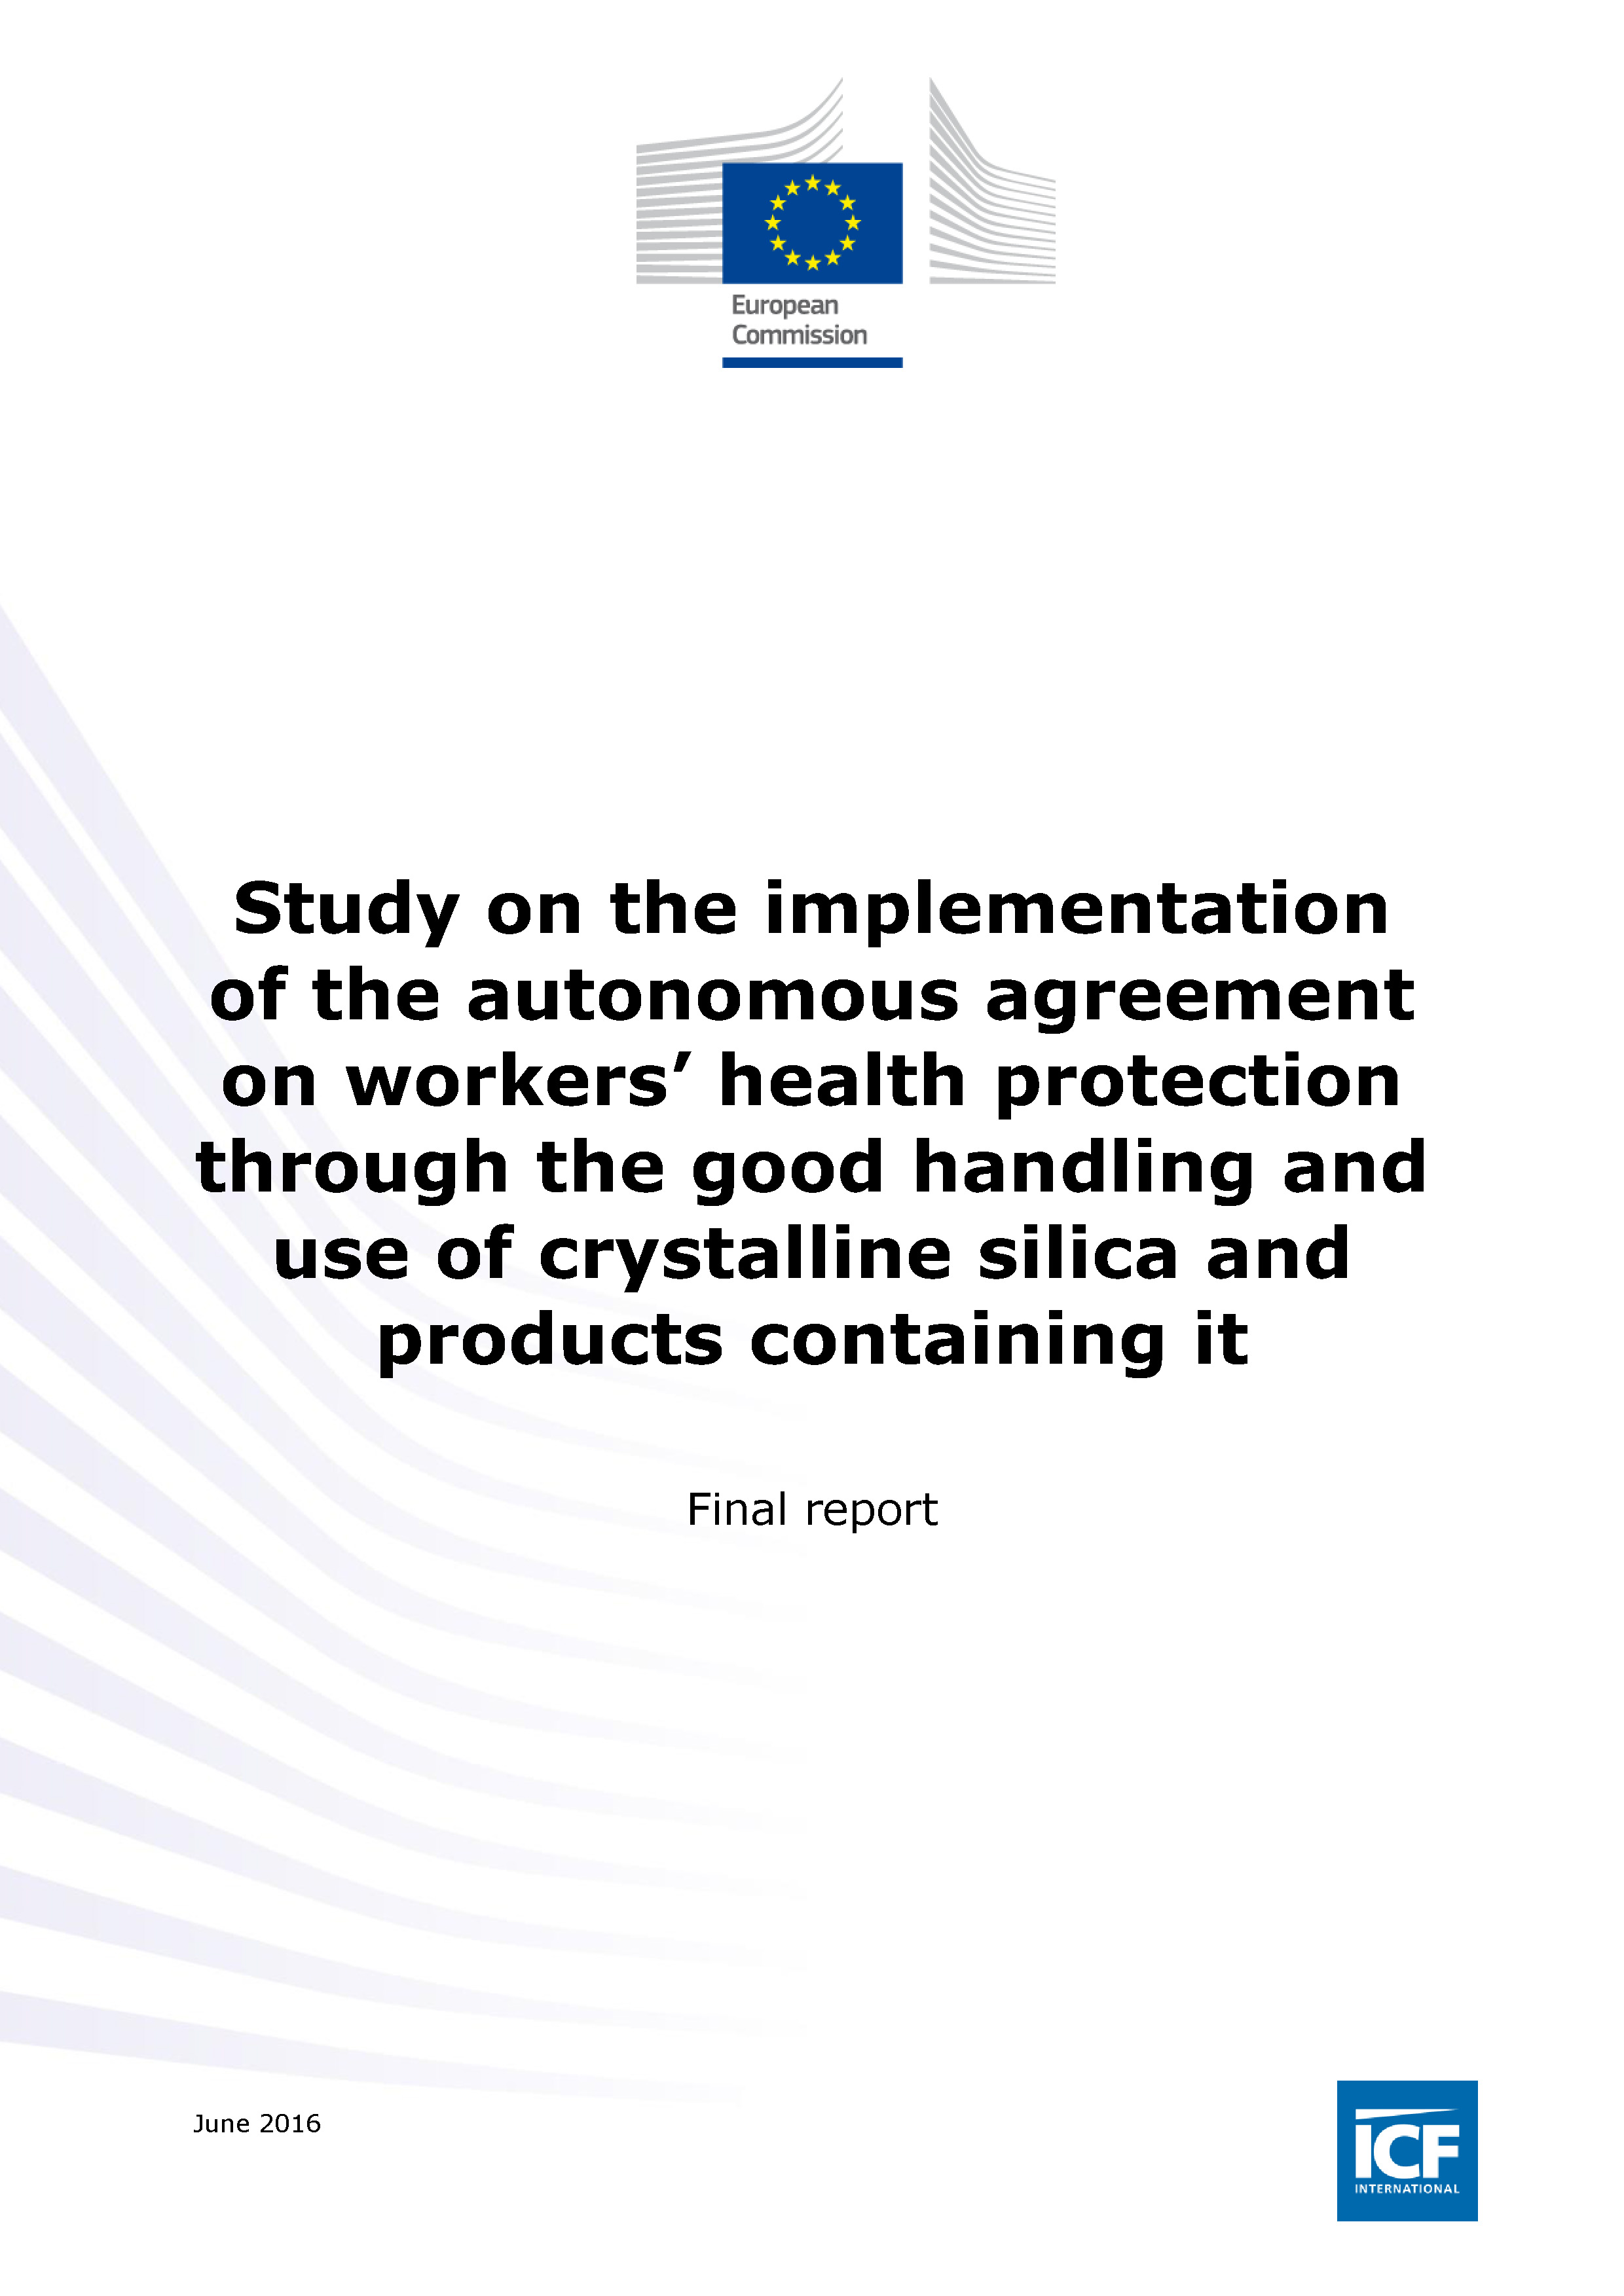 Study on the implementation of the autonomous agreement on workers’ health protection through the good handling and use of crystalline silica and products containing it